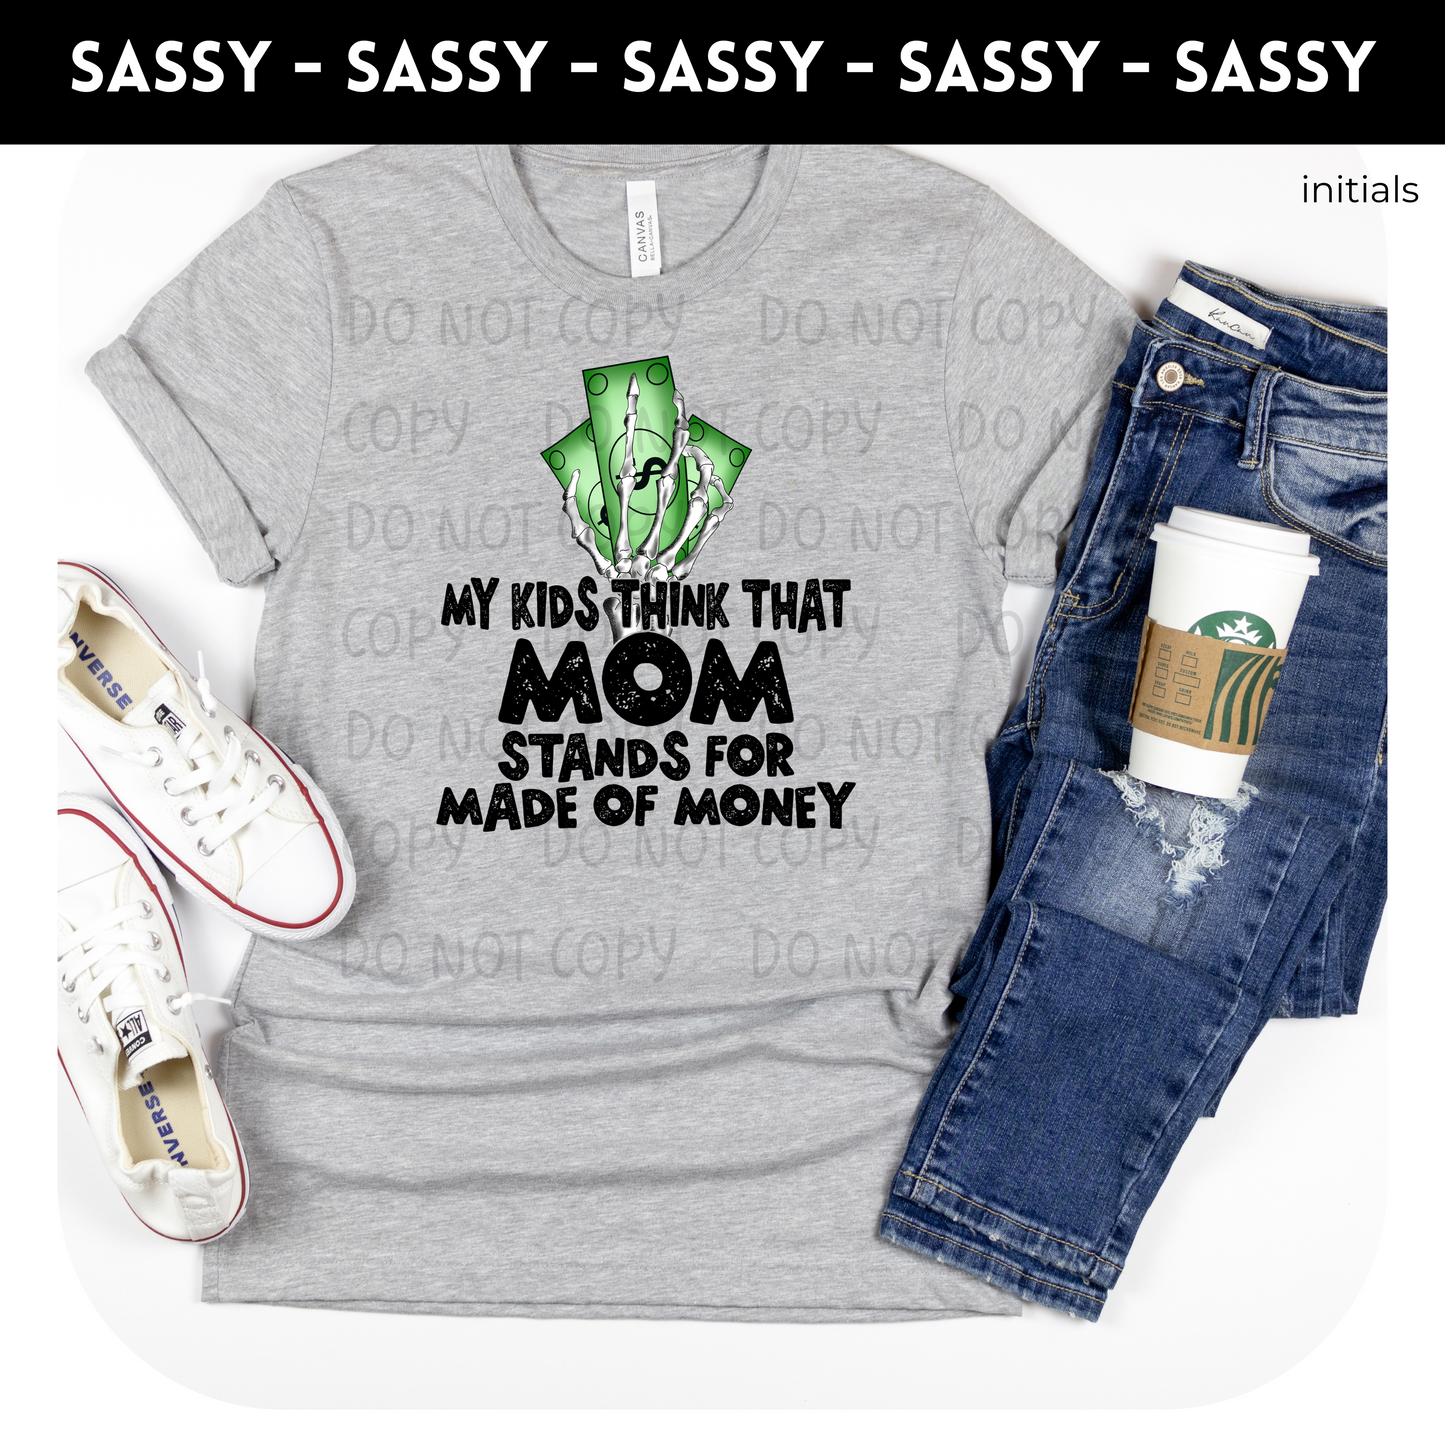 Mom Stands For Made Of Money Adult Shirt- Mom Life 379